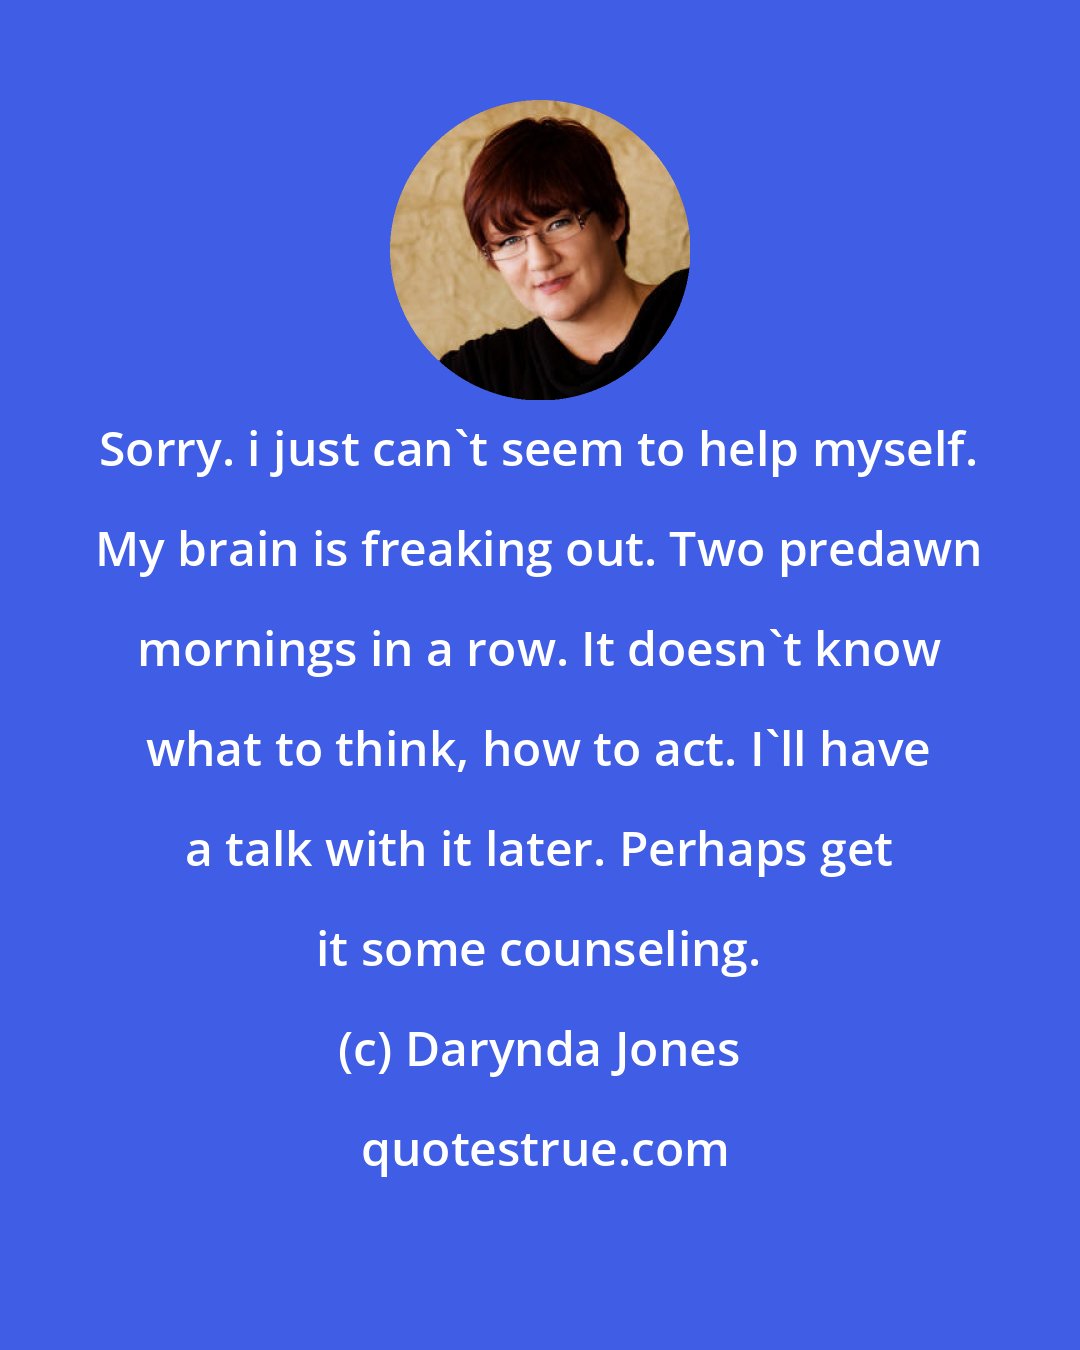 Darynda Jones: Sorry. i just can't seem to help myself. My brain is freaking out. Two predawn mornings in a row. It doesn't know what to think, how to act. I'll have a talk with it later. Perhaps get it some counseling.